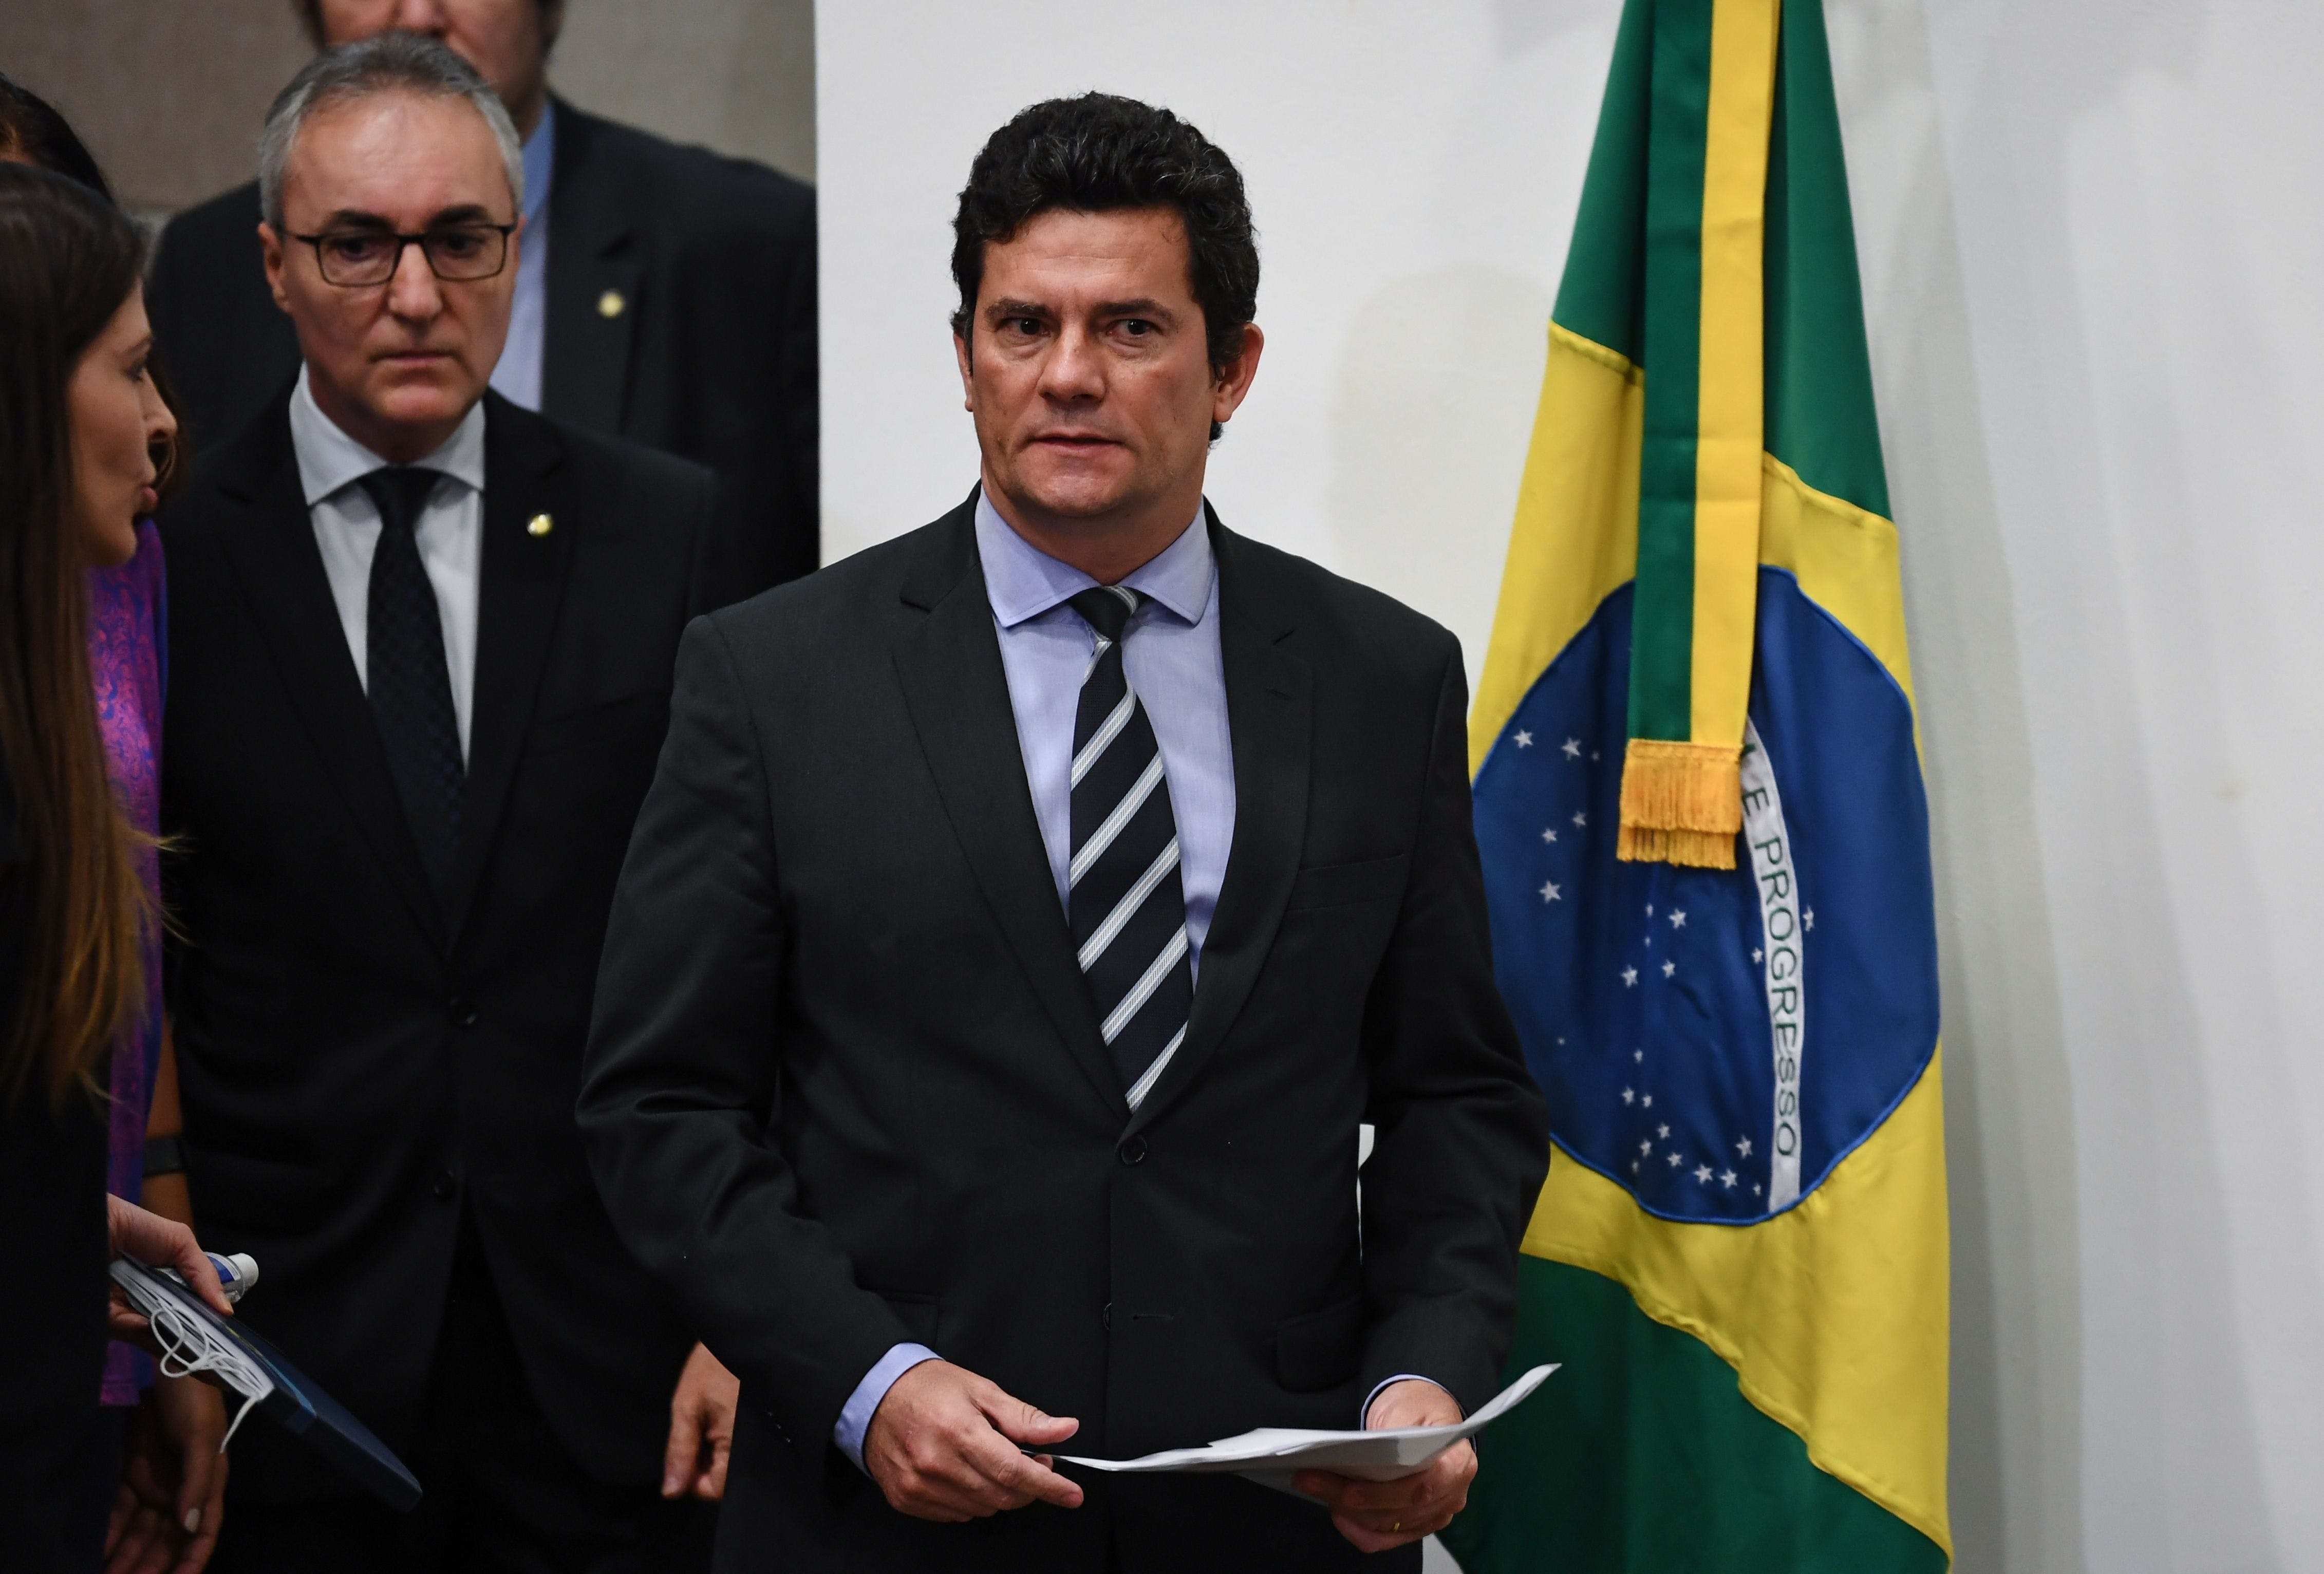 Brazilian Minister of Justice and Public Security, Sergio Moro, arrives to deliver a press conference at Minister of Justice, in Brasilia, on April 24, 2020. (Photo by EVARISTO SA / AFP) (Photo by EVARISTO SA/AFP via Getty Images)